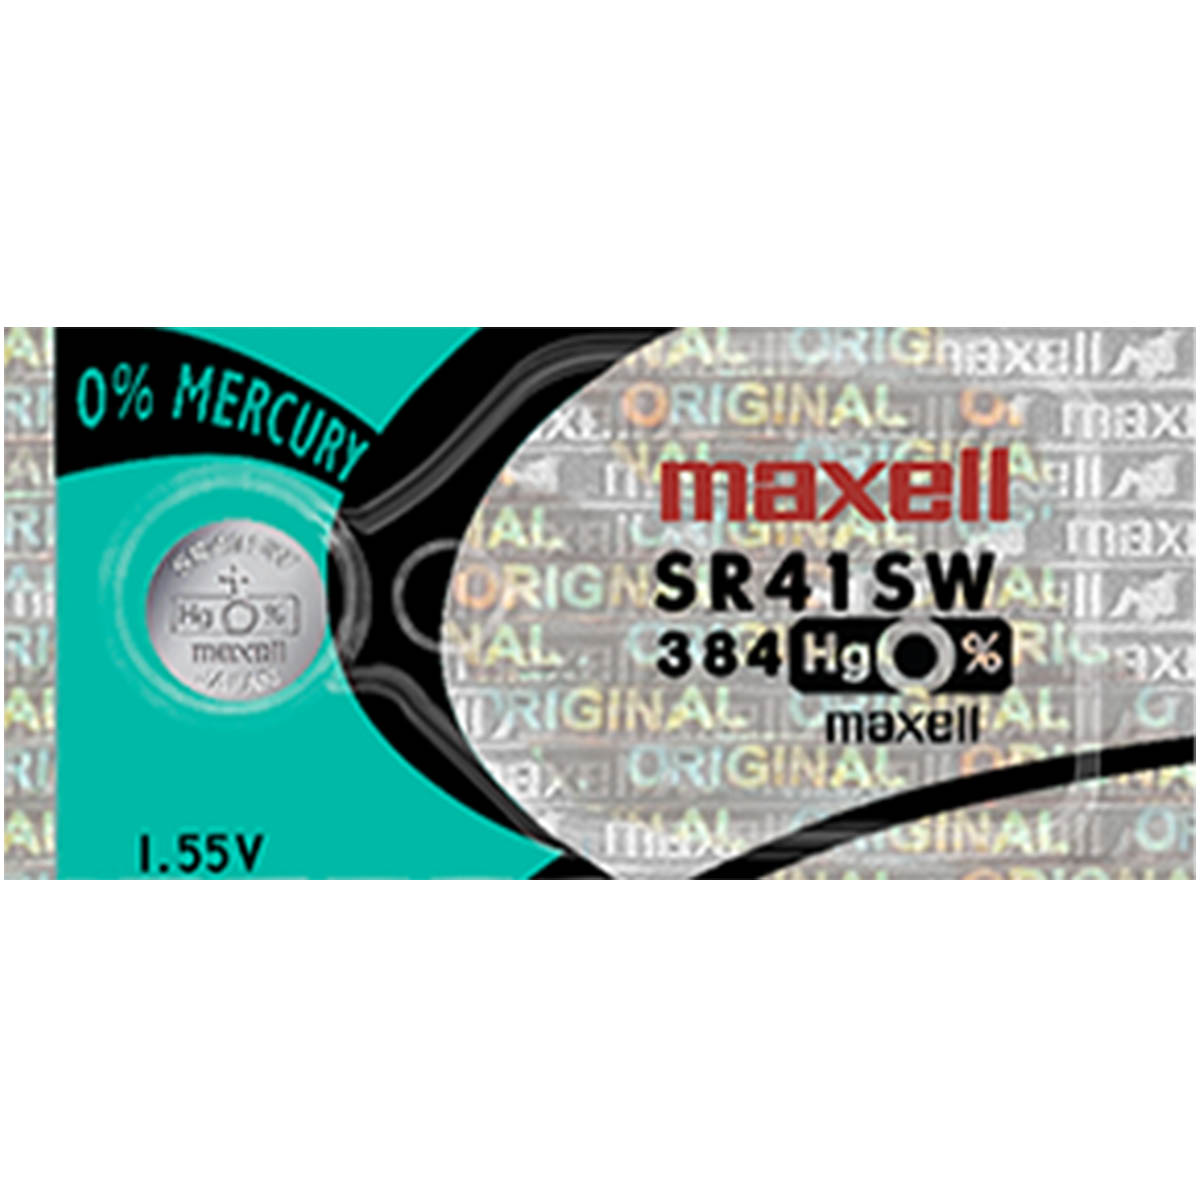 Maxell 384 Watch Battery (SR41SW ) Silver Oxide 1.55V